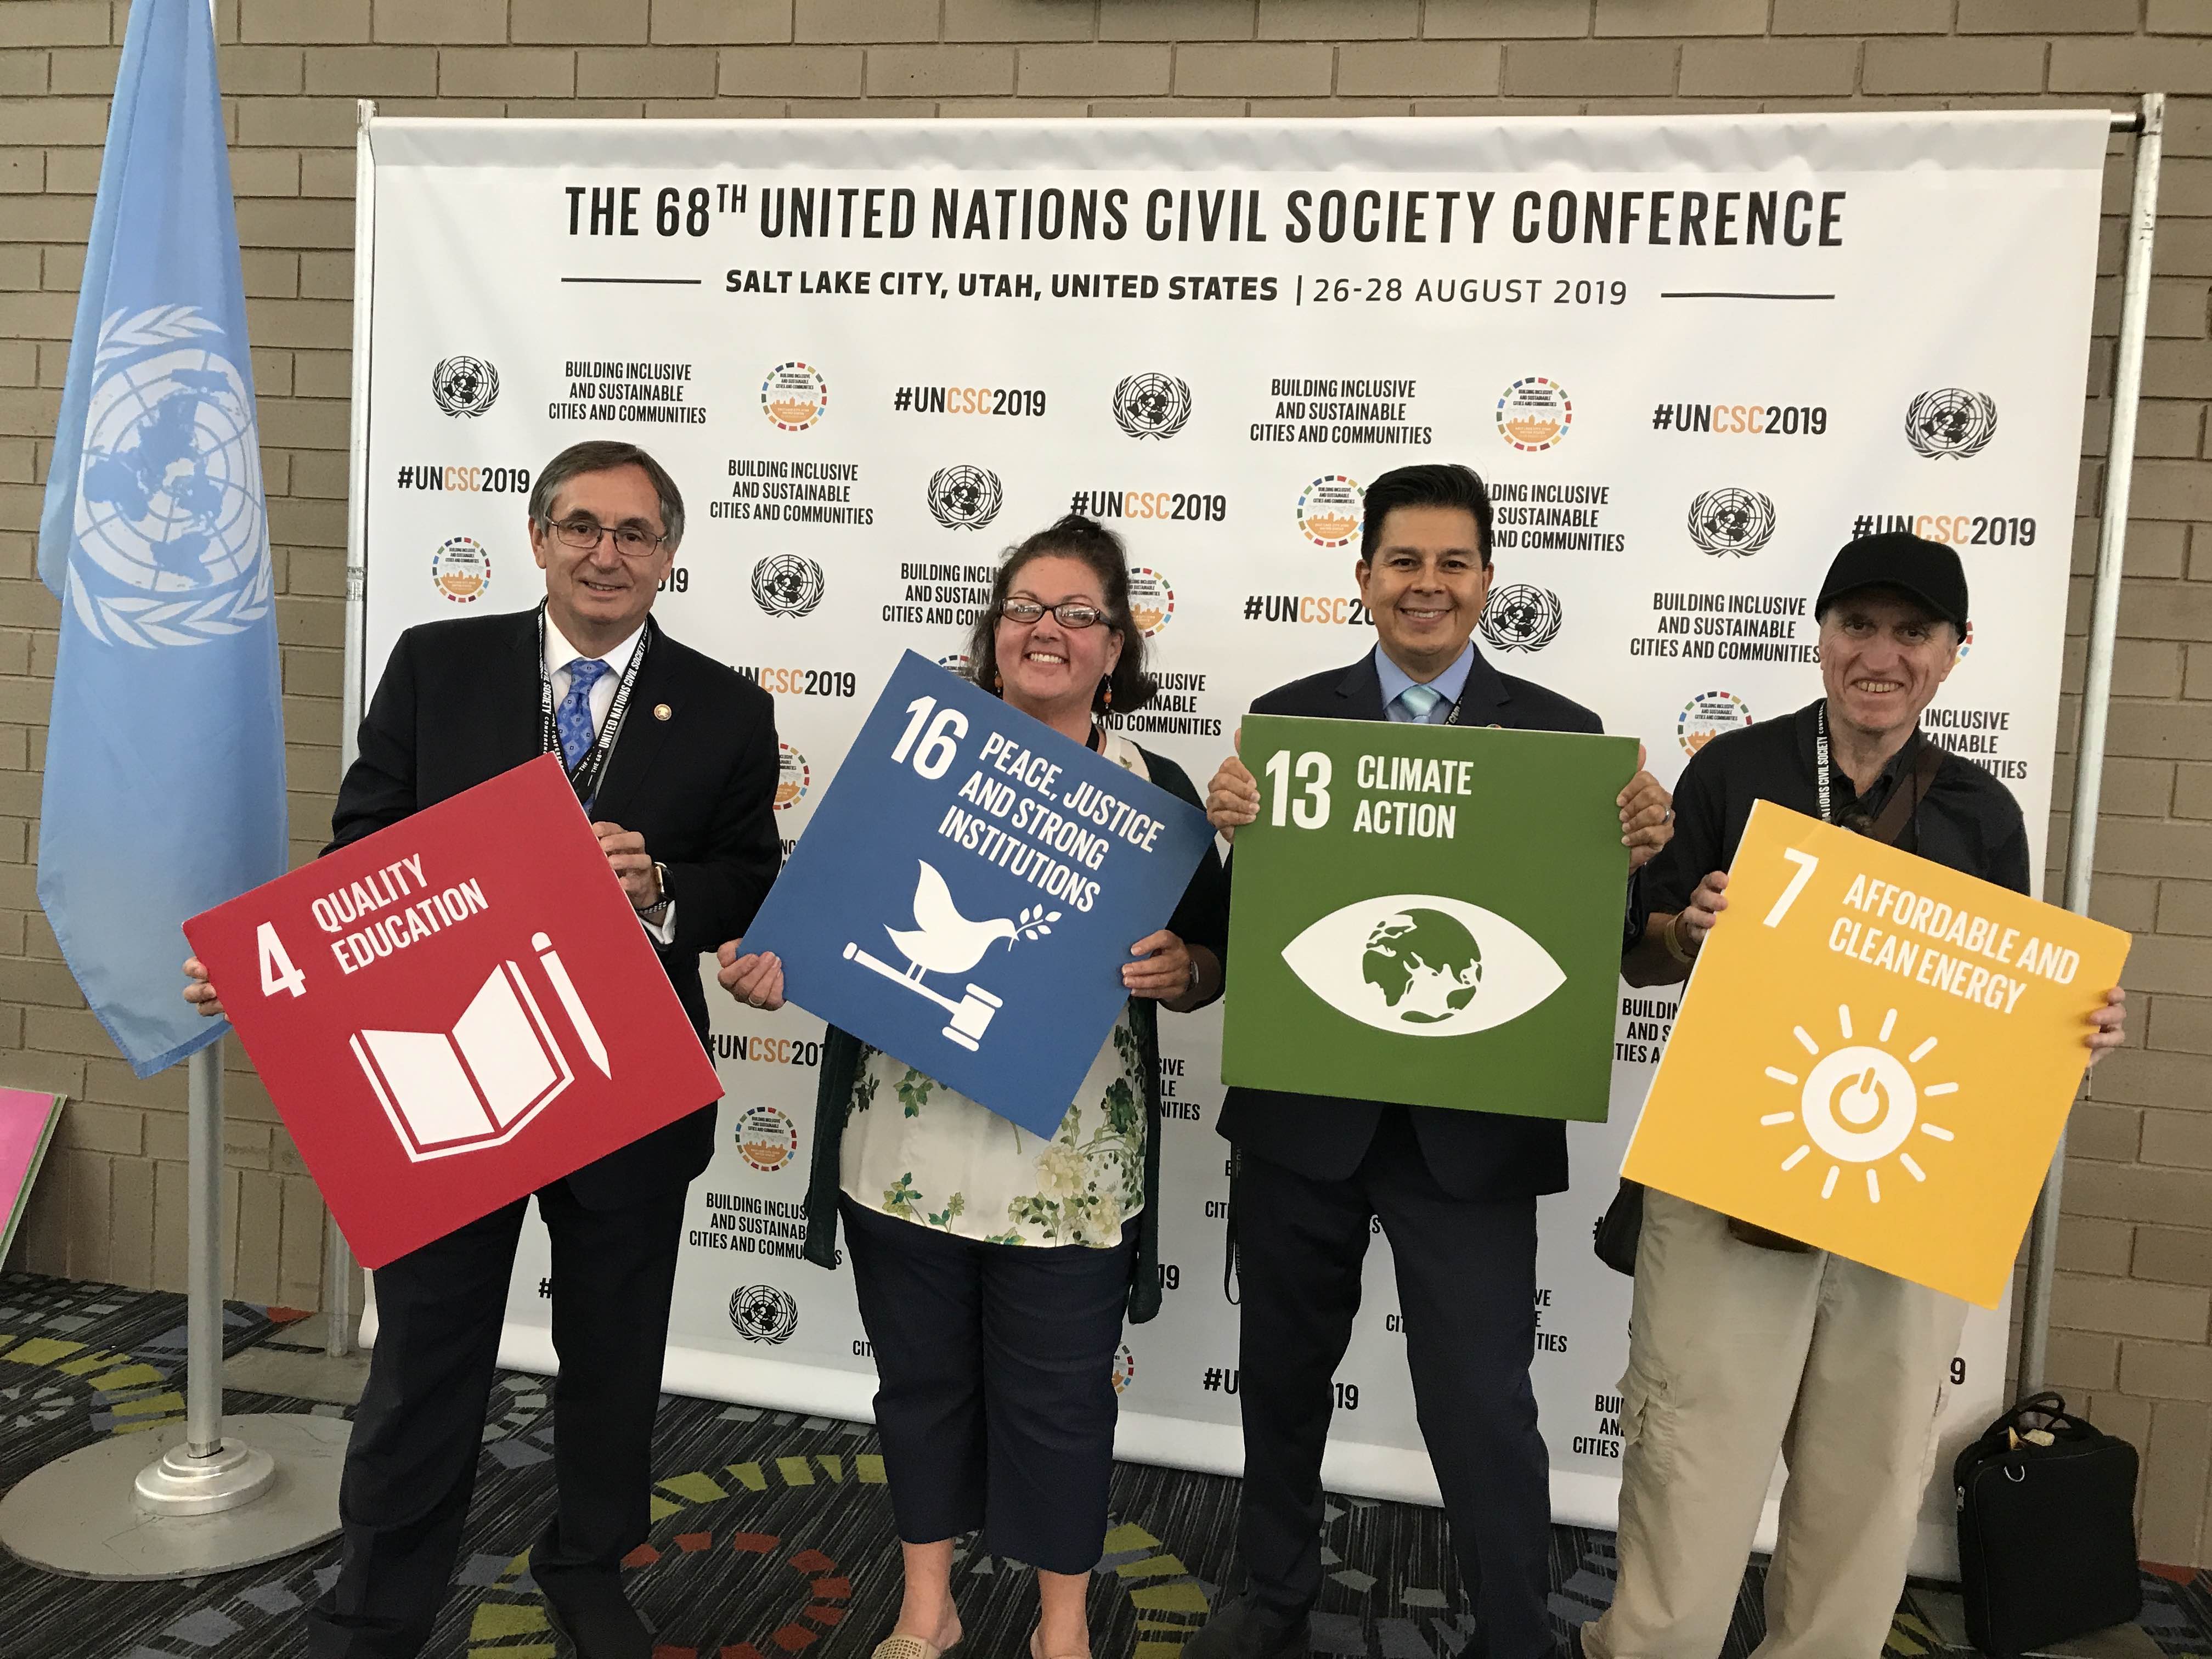 Sustainable Development Goals with people